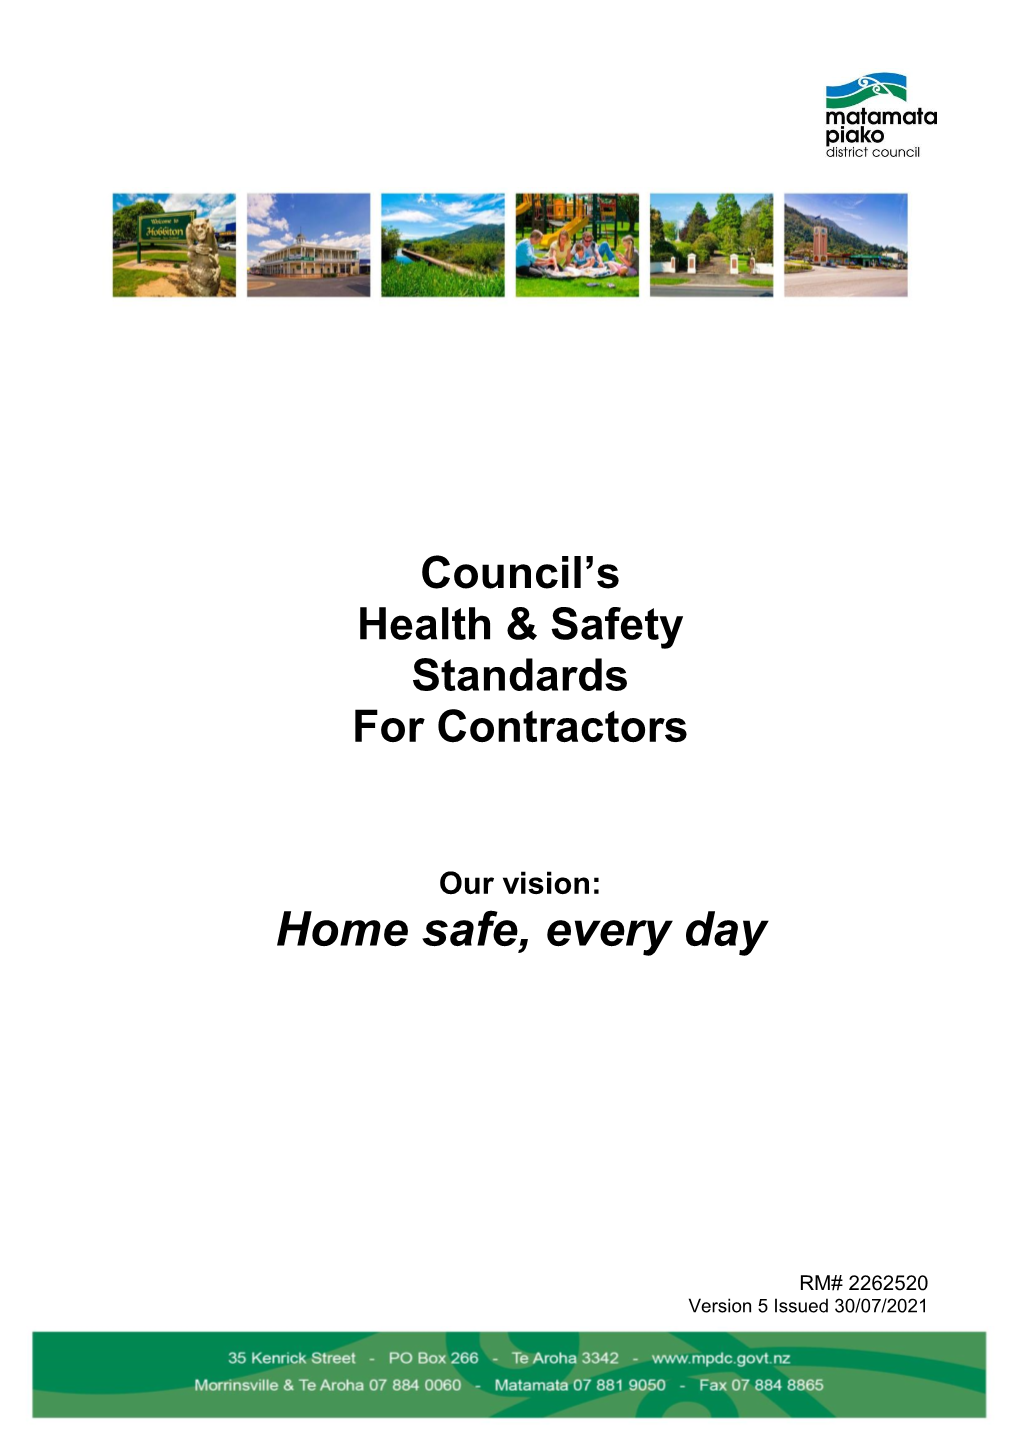 Download MPDC's Health and Safety Standards for Contractors